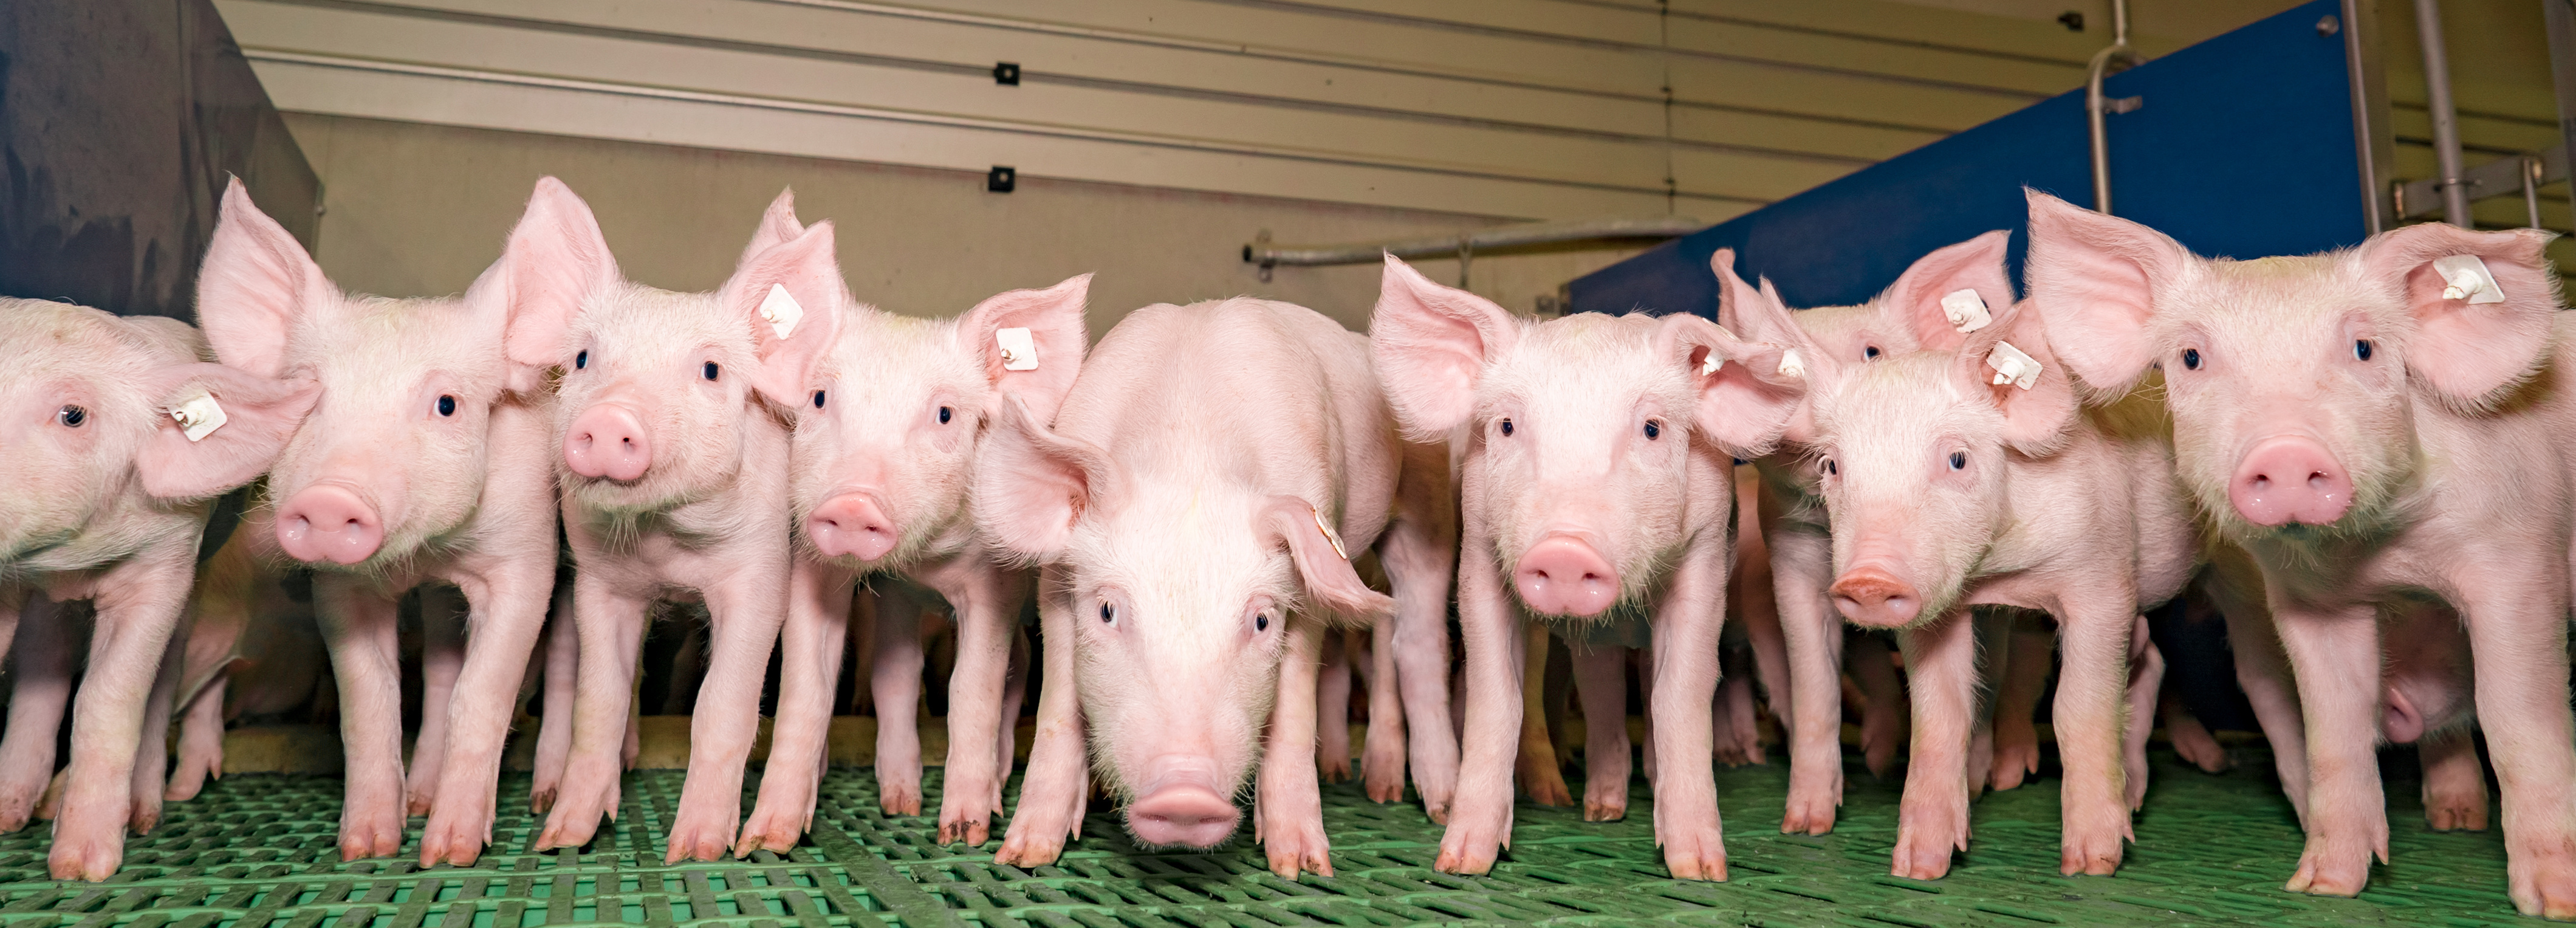 The US currently houses around 6 million pigs. Without genetic improvement, Americans would need to raise 15 million pigs to produce the same amount of meat.